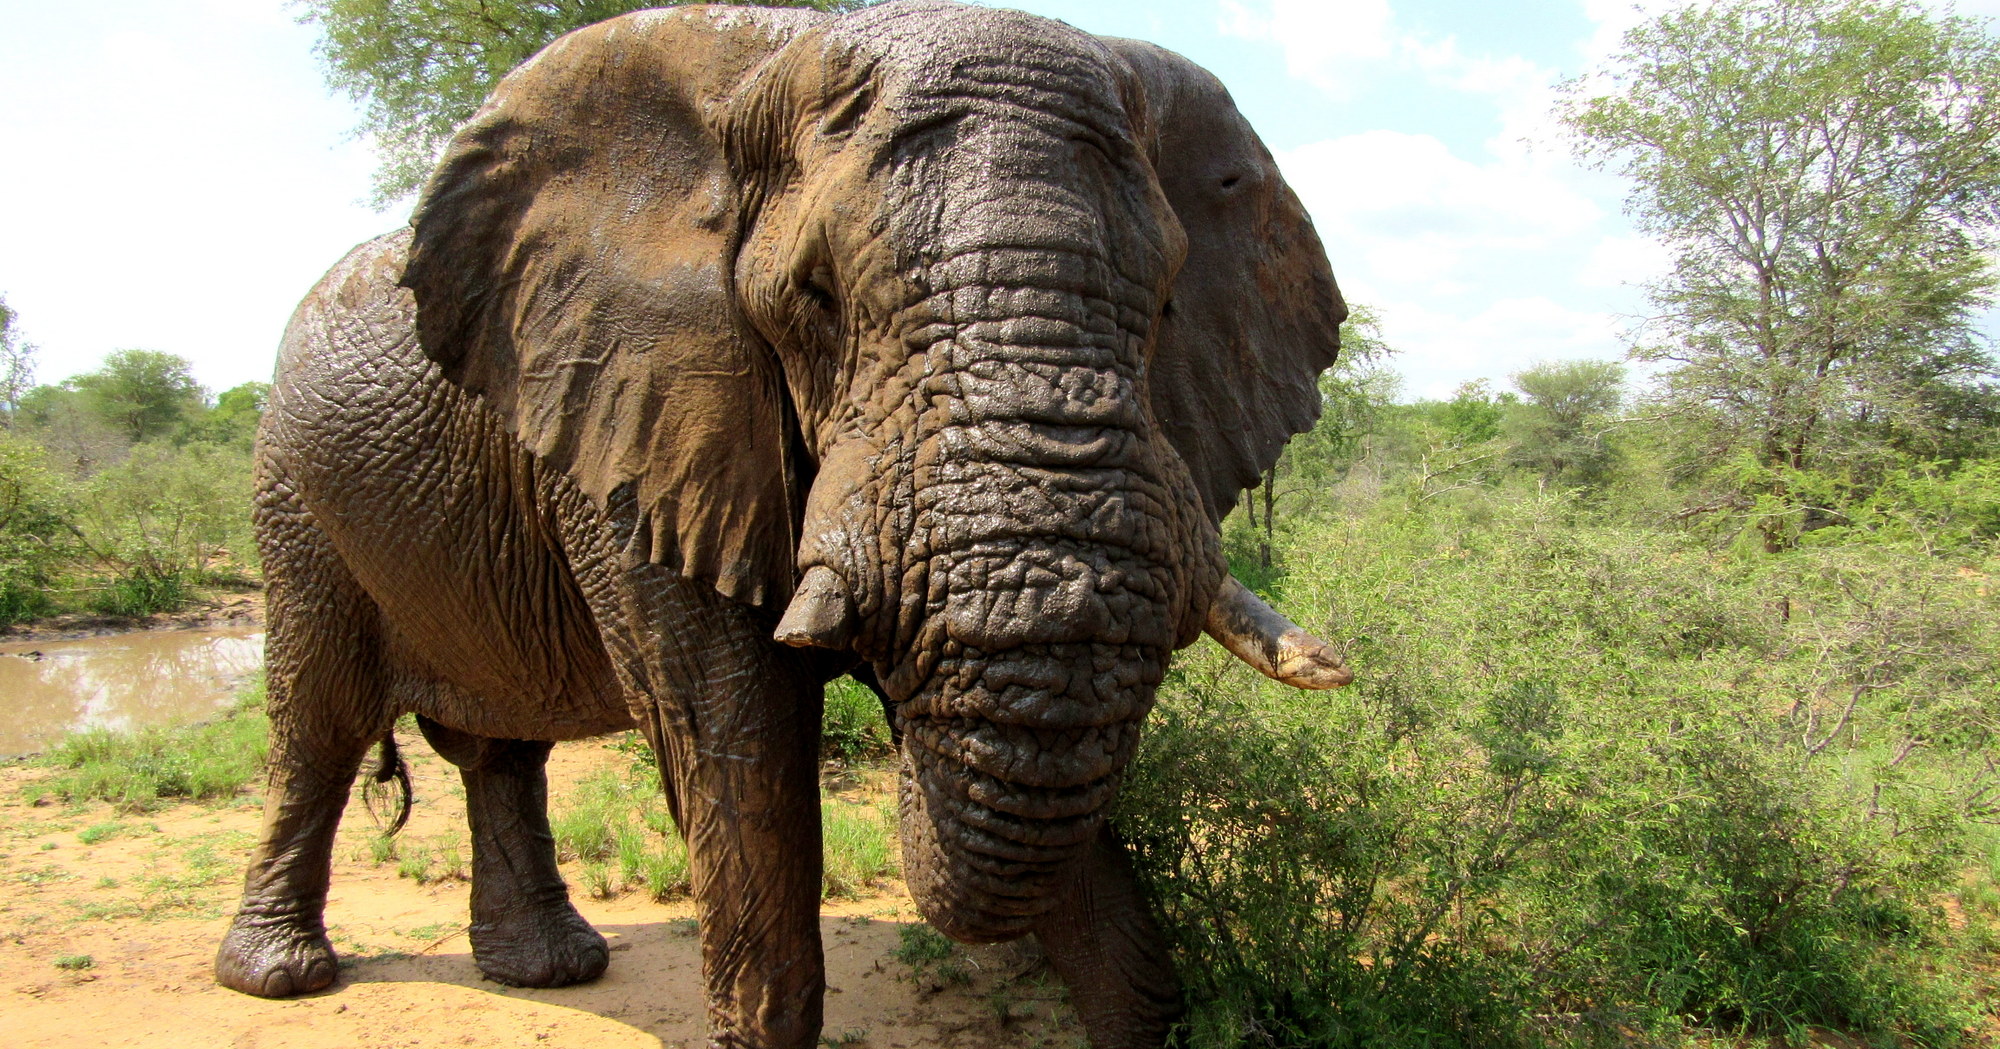 The problem of an elephant bull who just wants to stay home